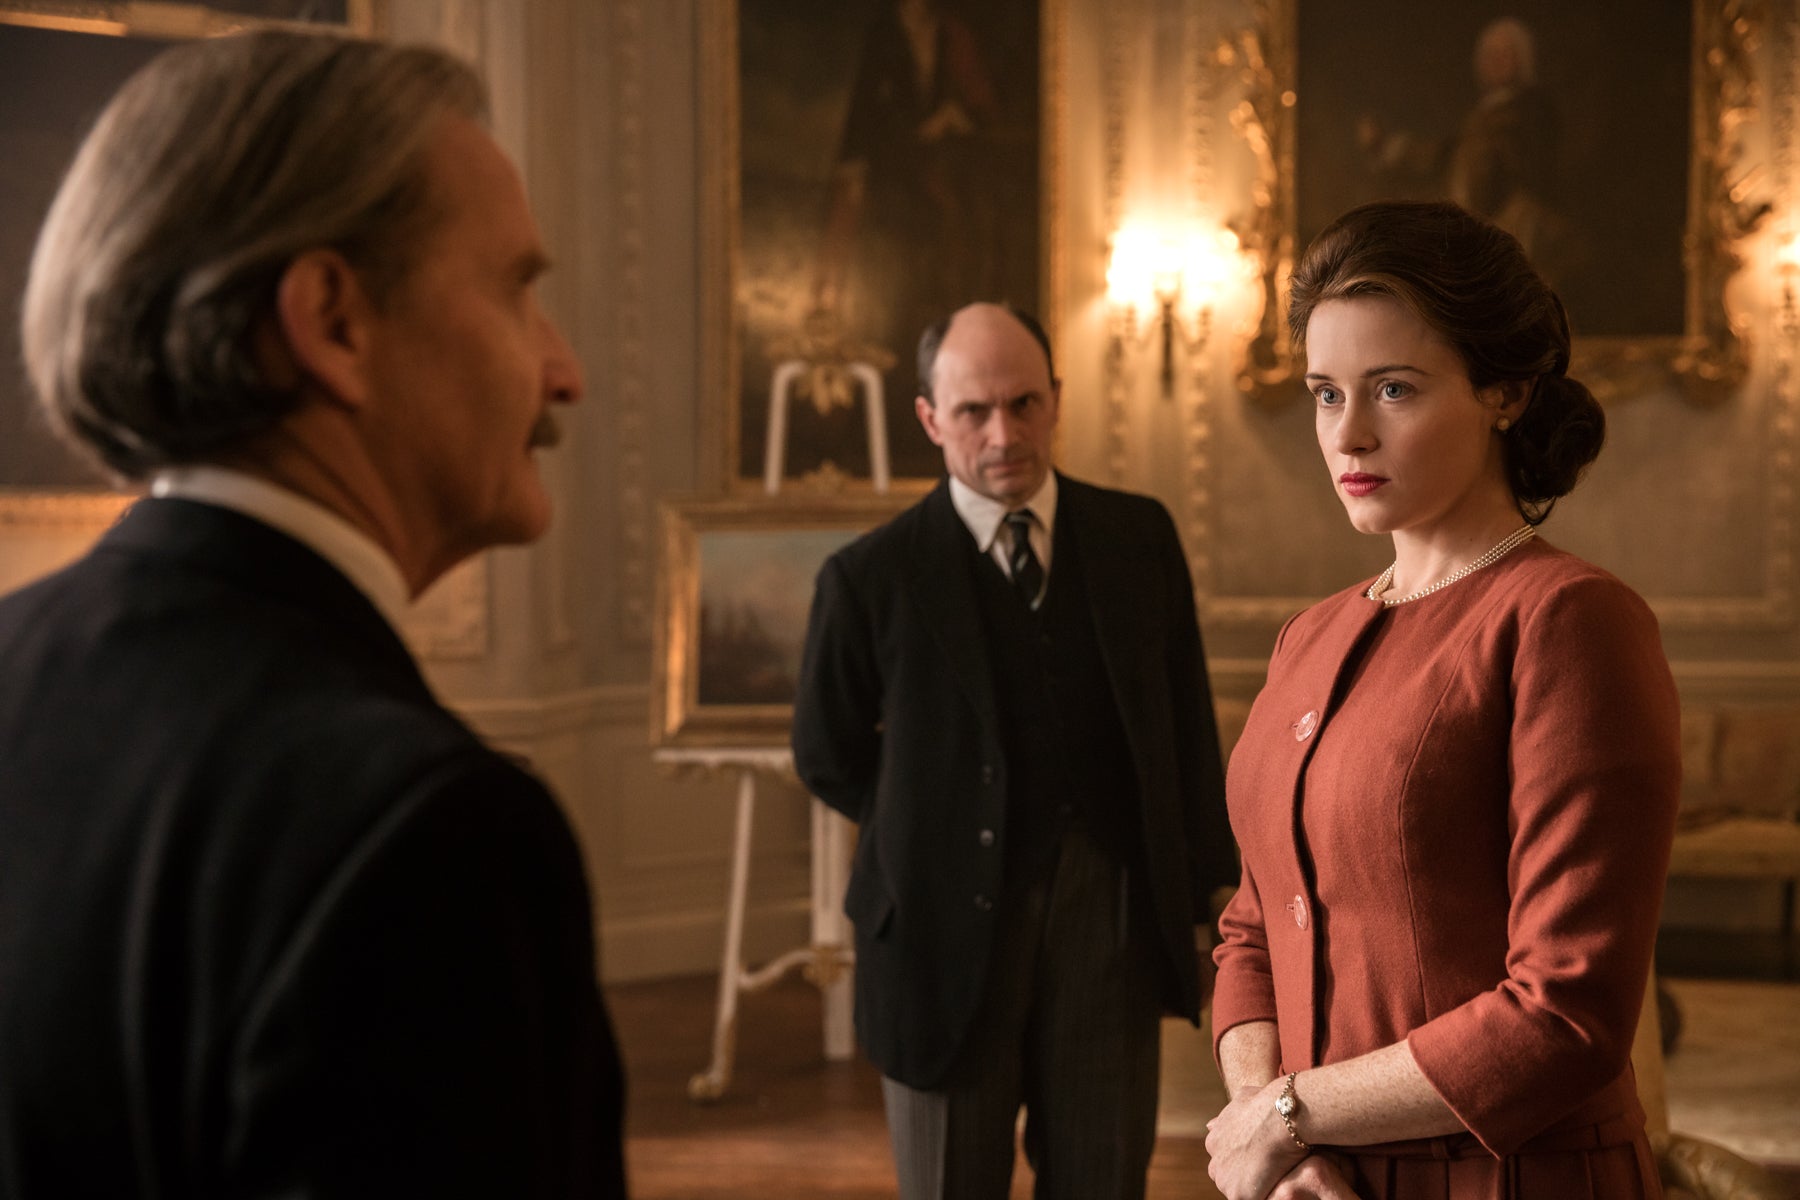 Queen Elizabeth stares at Prime Minister Macmillan (Anton Lesser) in pure disappointment